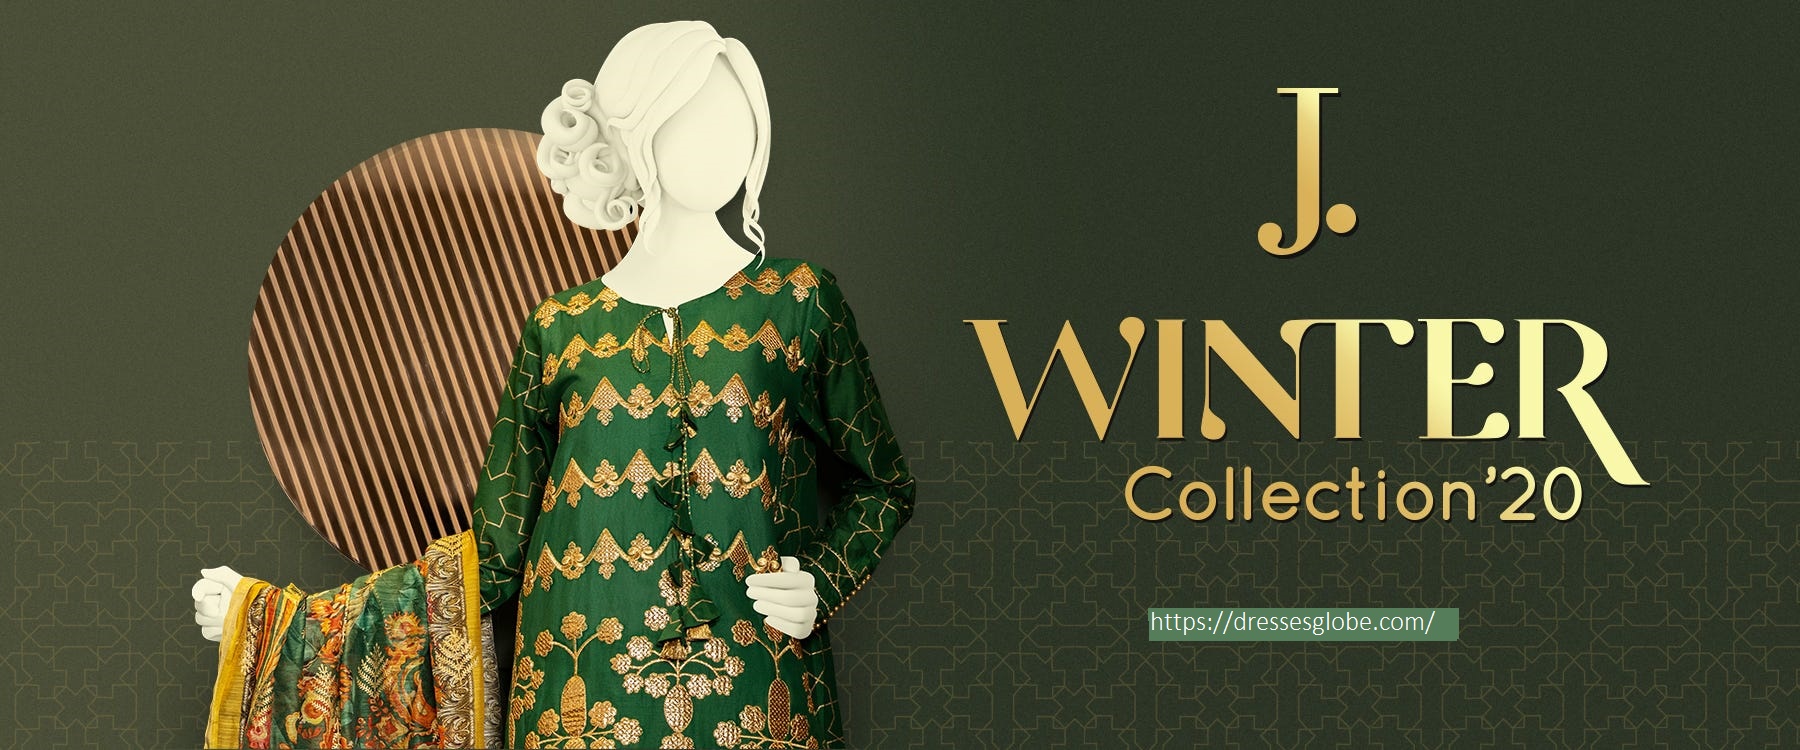 New Junad Jamshed Winter dresses collection 2021